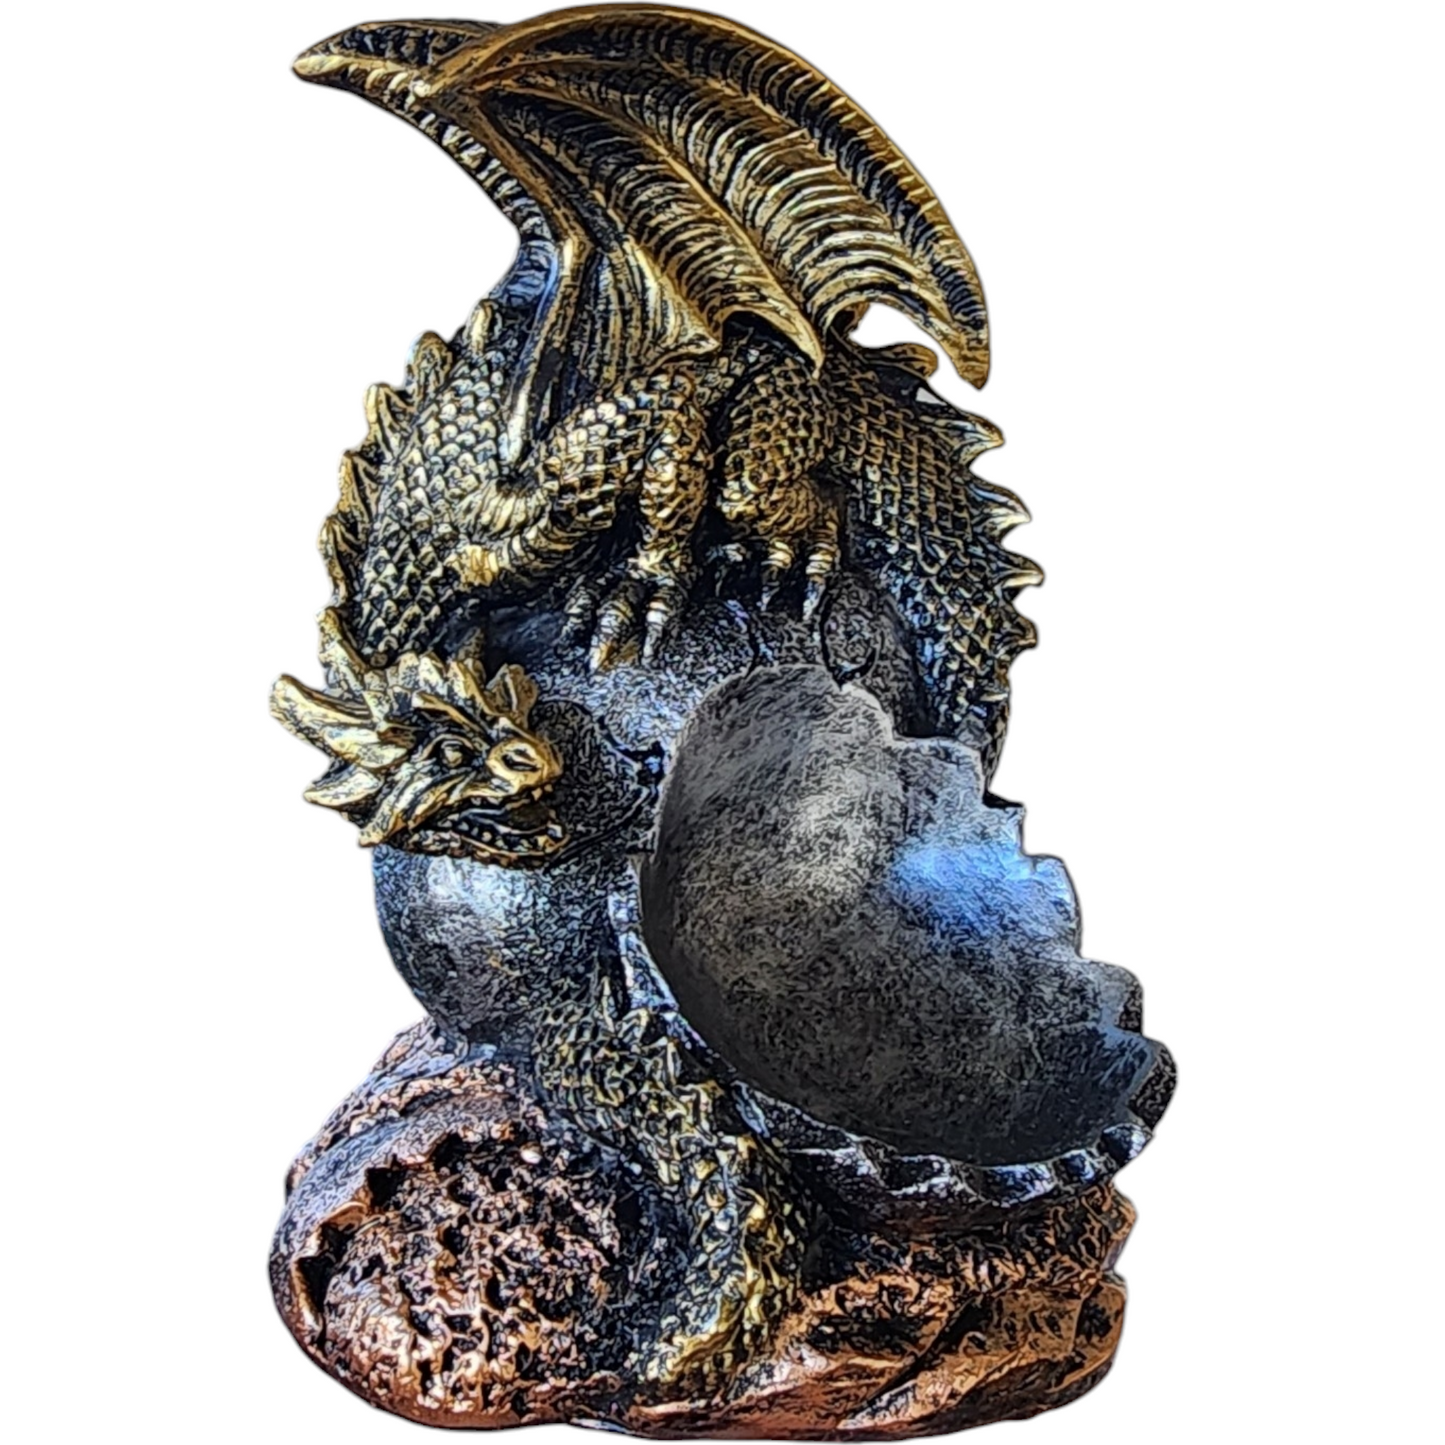 Guardian Dragon Sphere Stand Holder